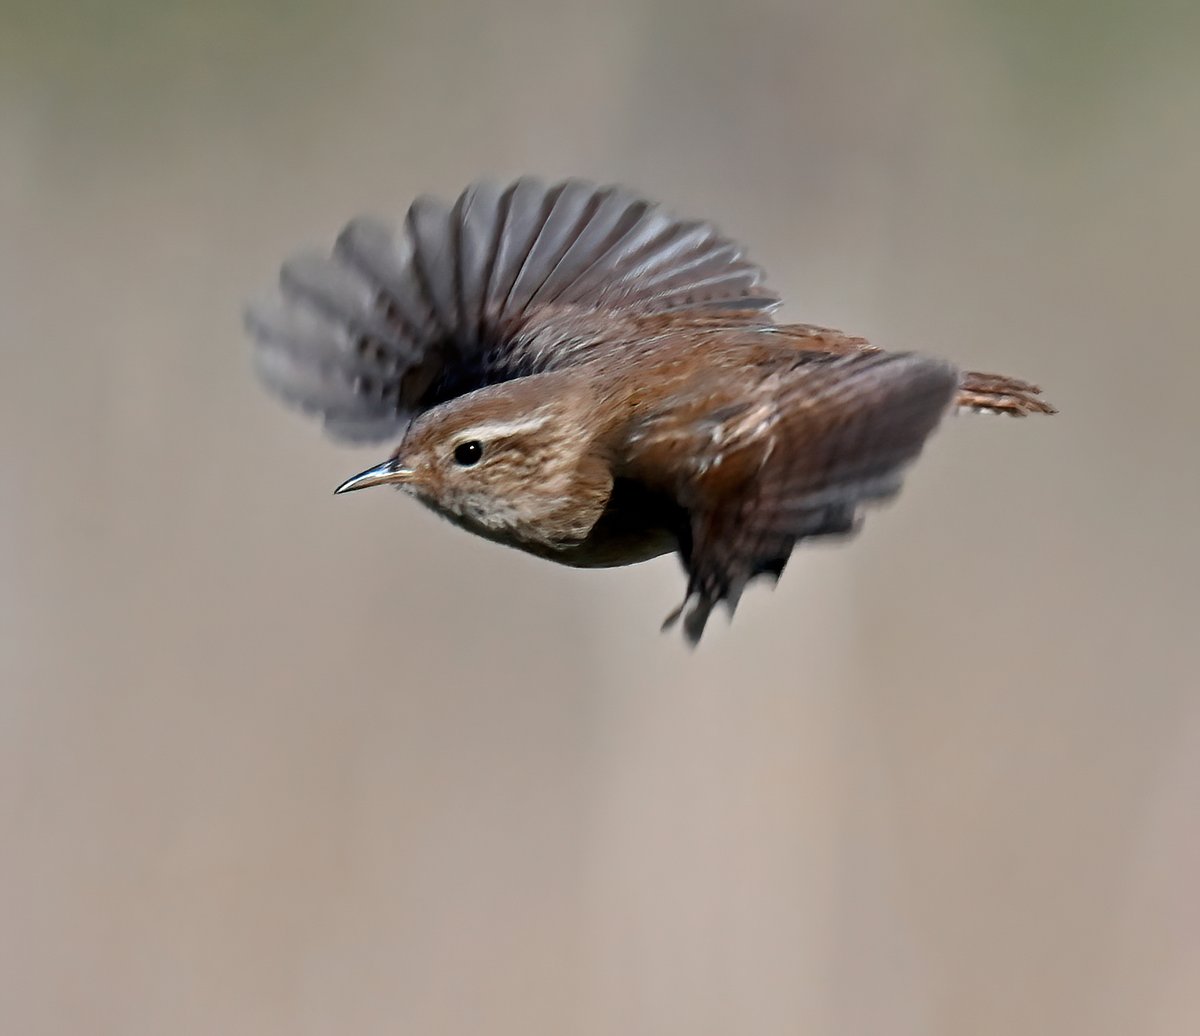 Tiny Wren in flight. 😍
 Taken at the weekend at RSPB Ham Wall in Somerset. 😊🐦